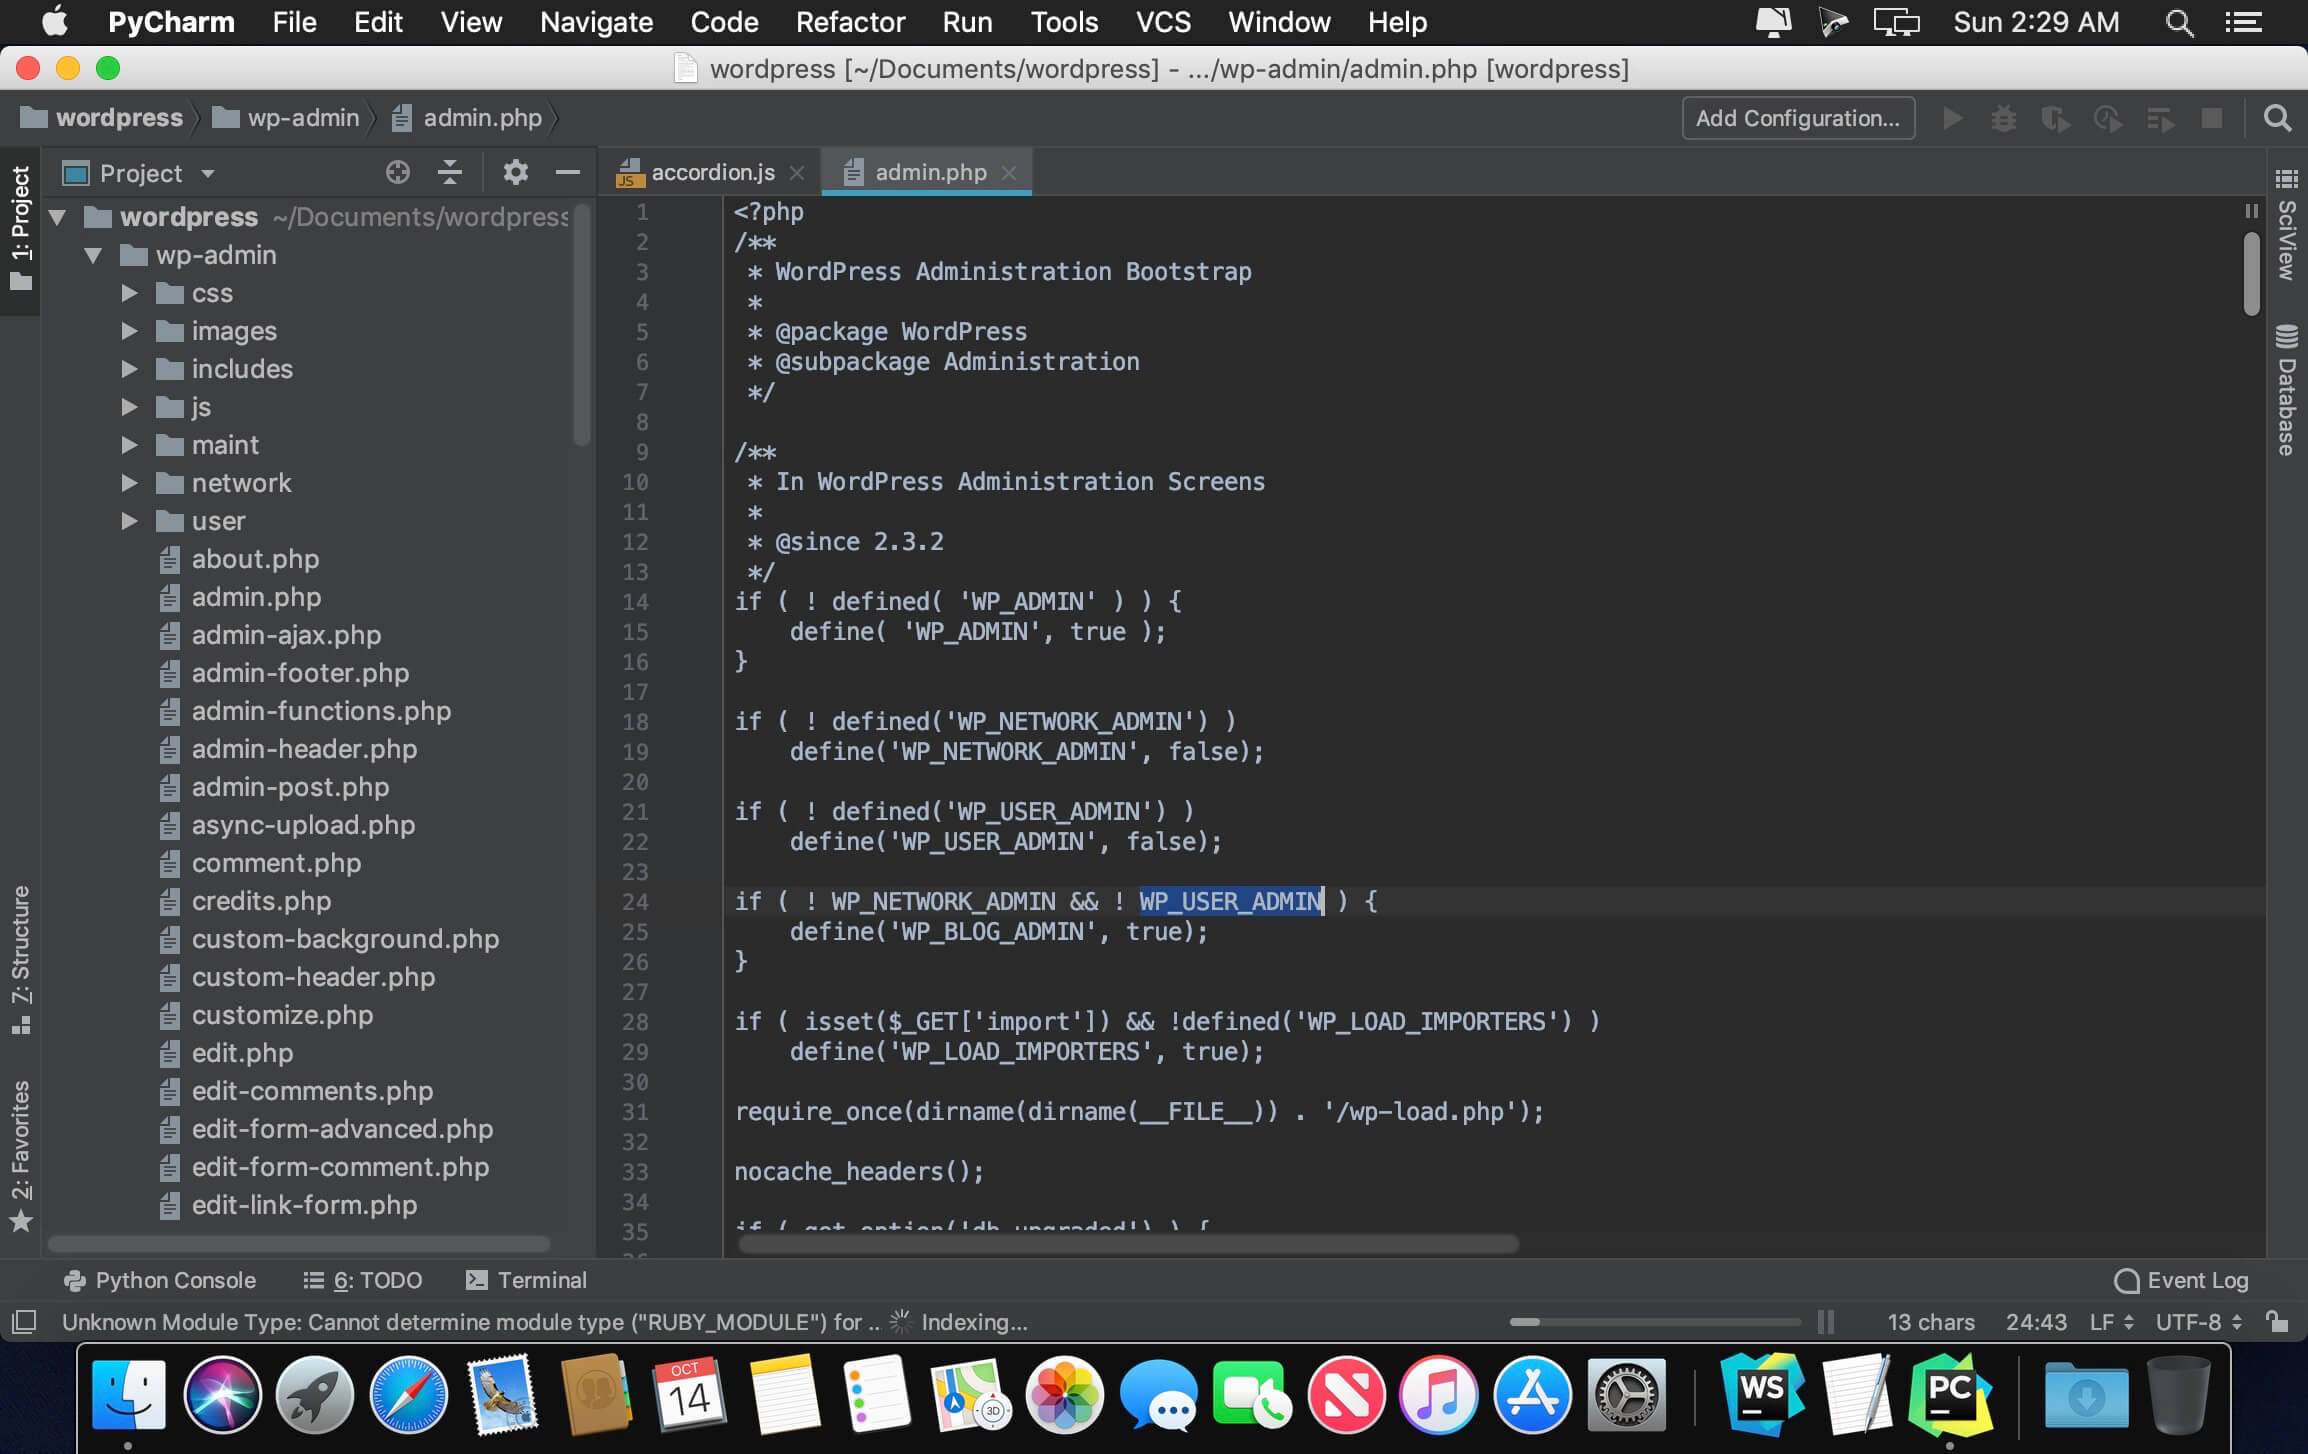 pycharm professional for